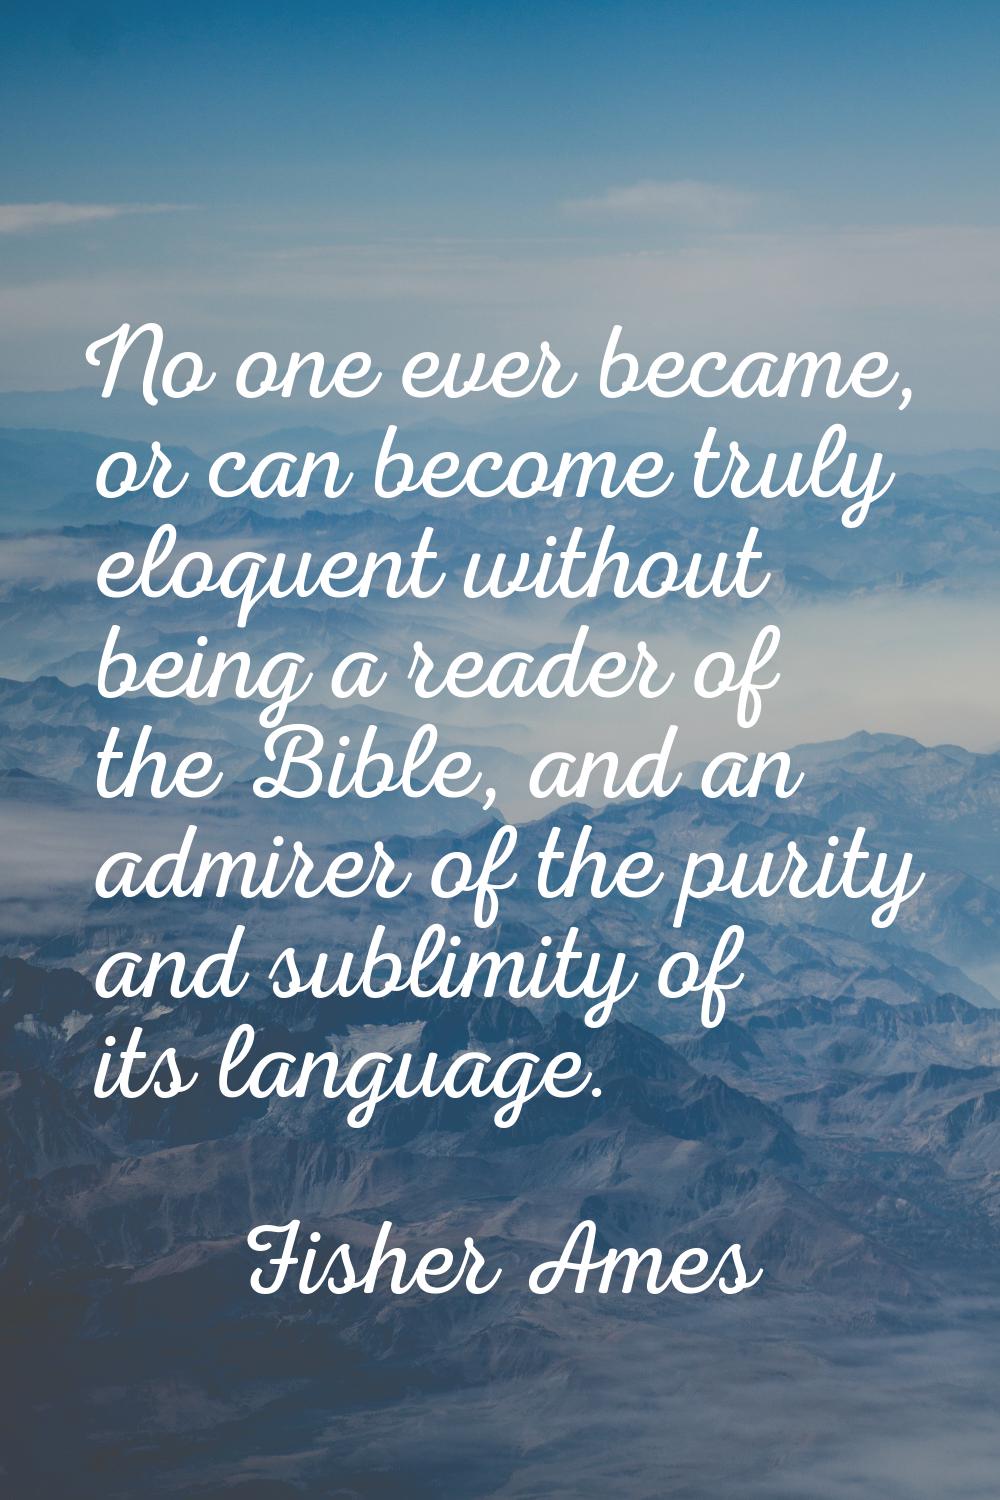 No one ever became, or can become truly eloquent without being a reader of the Bible, and an admire